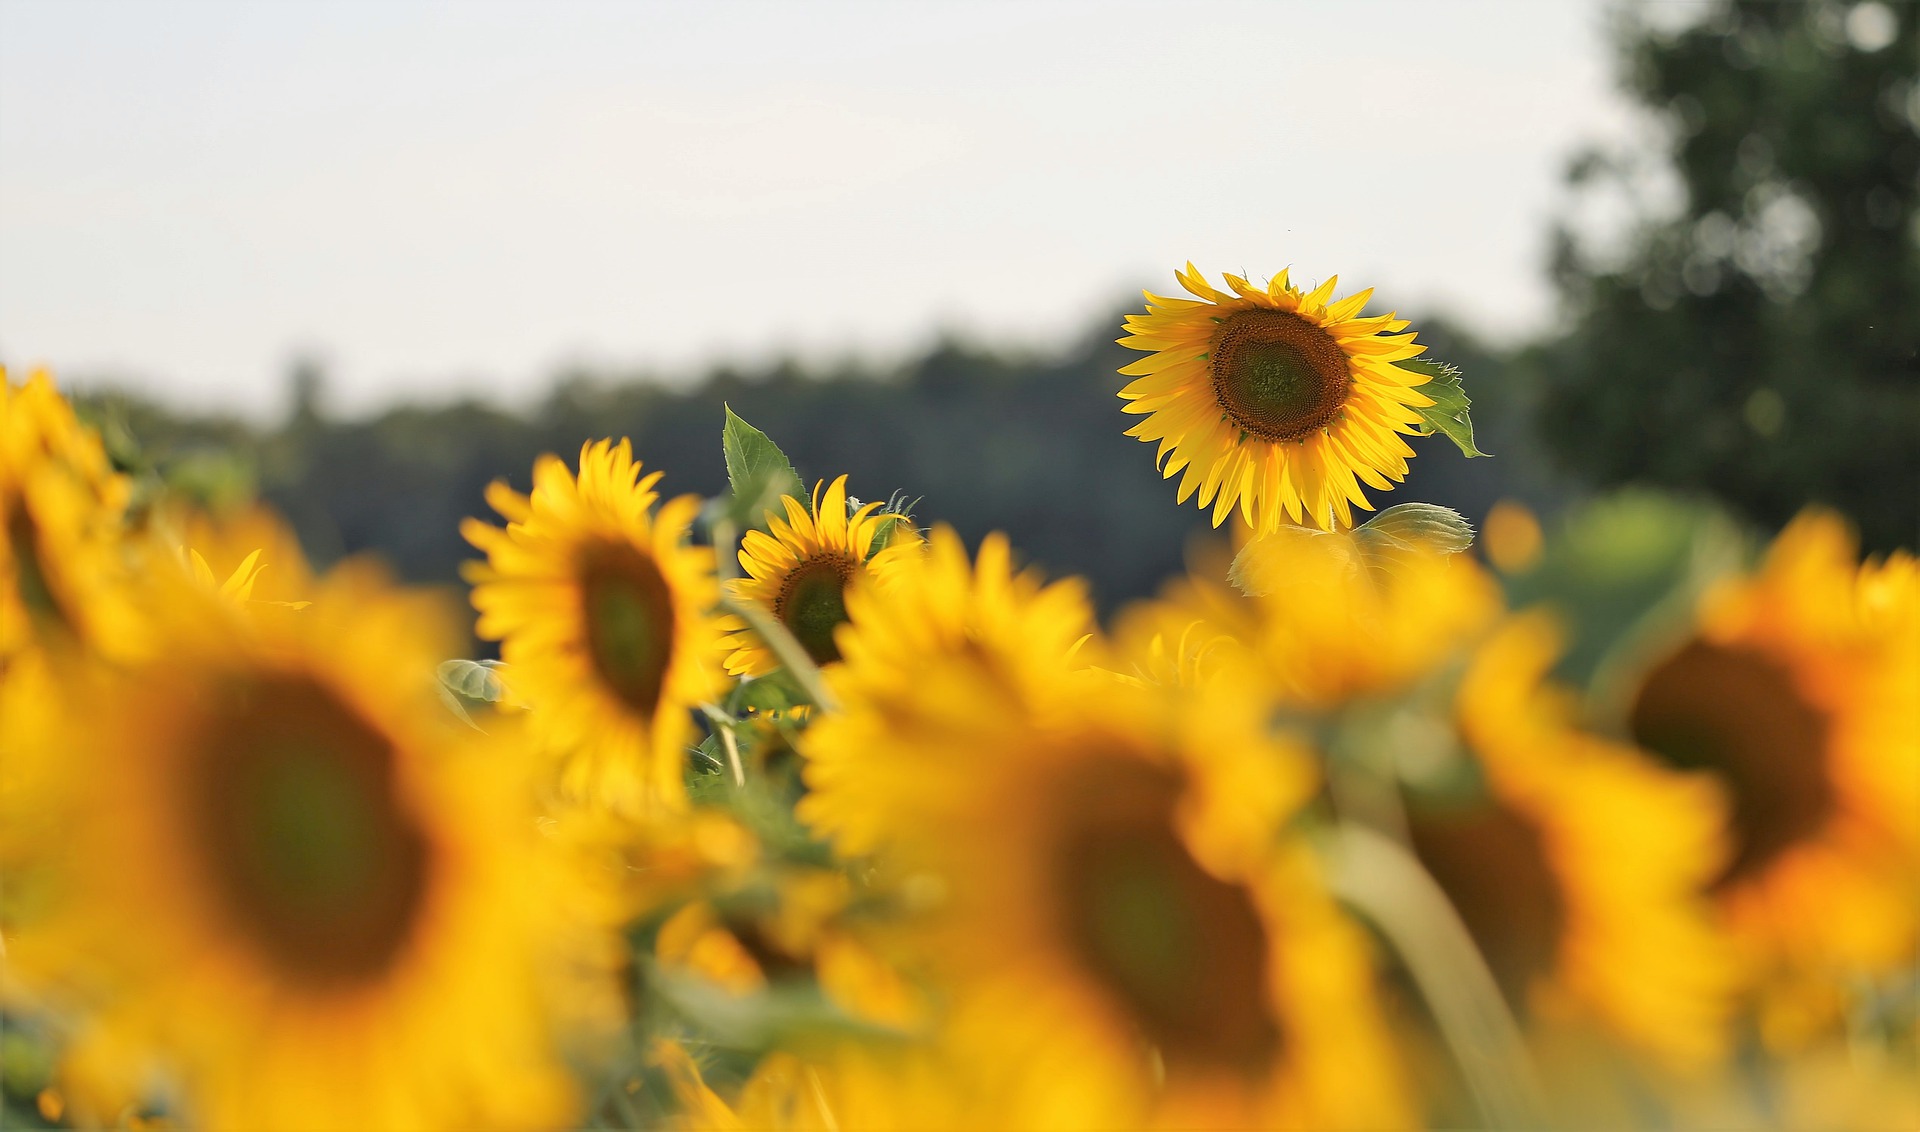 Ukraine increased the production of sunflower oil by 15%